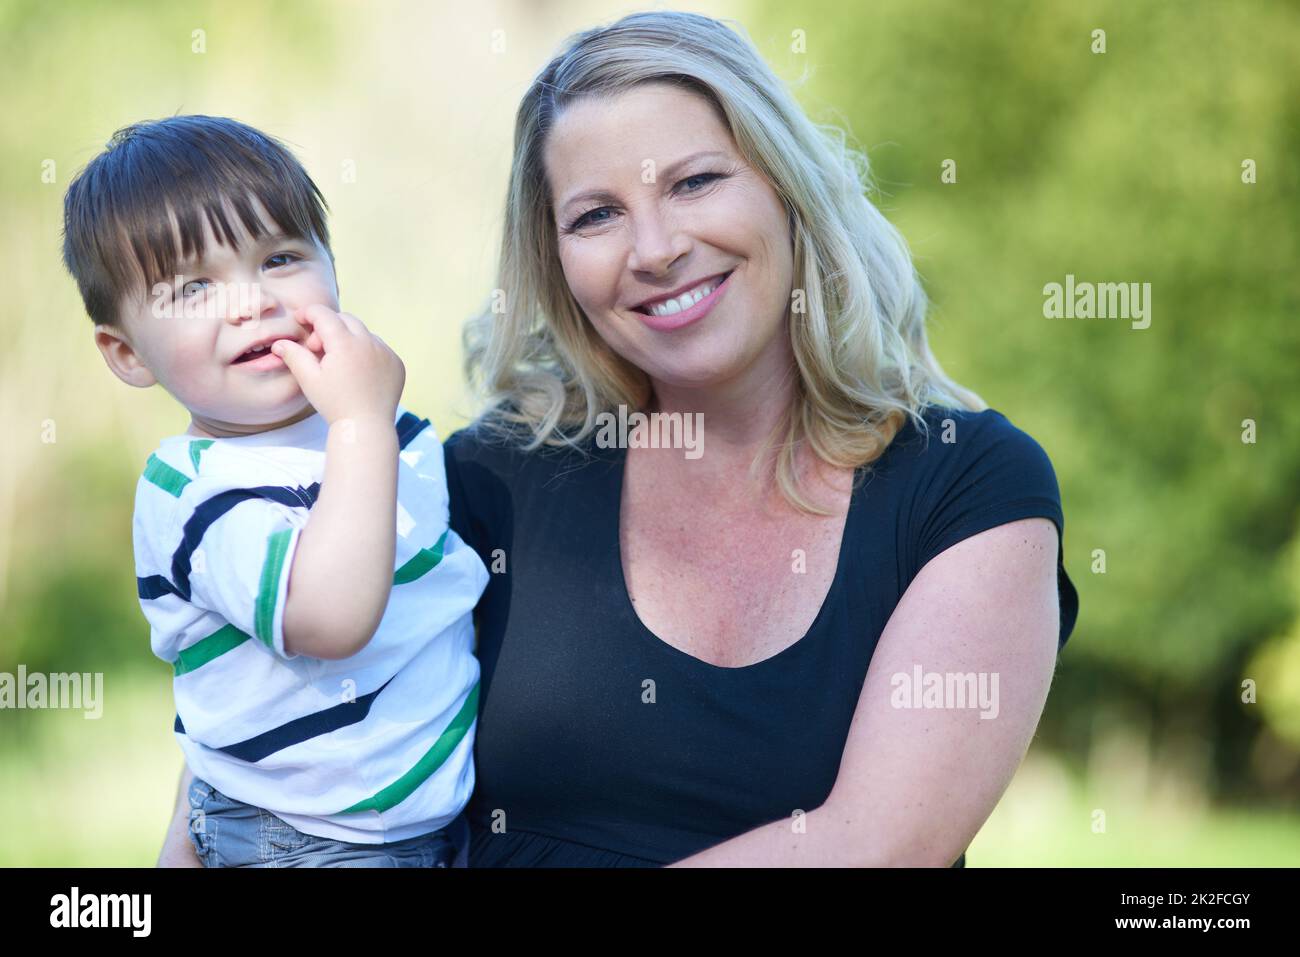 Hes my pride and joy. Portrait of a happy mother holding her baby boy. Stock Photo